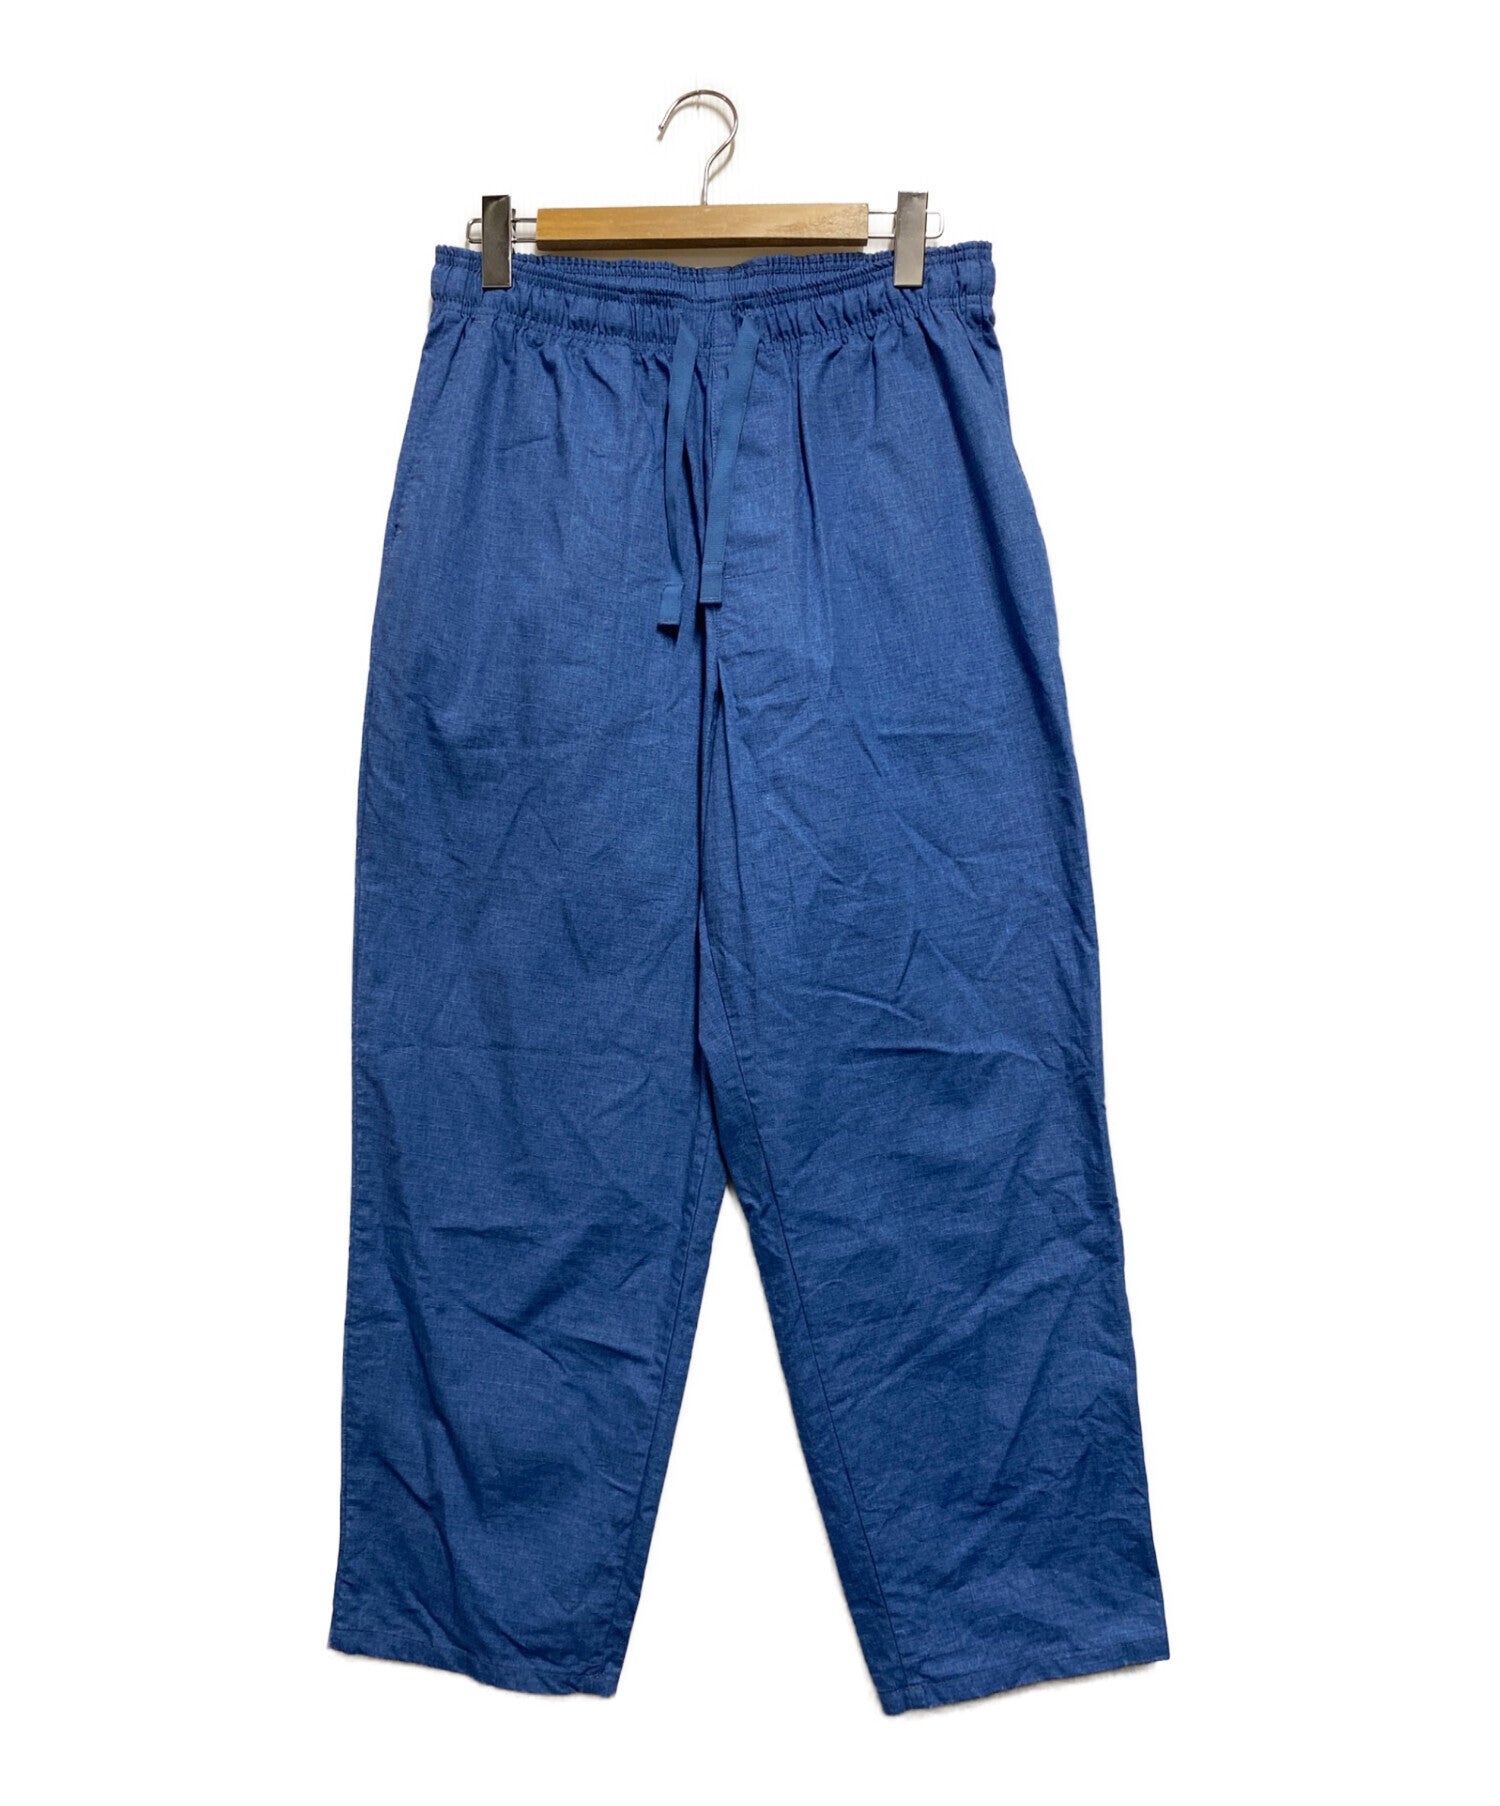 WTAPS 23AW ROUSERS / COTTON. RIPSTOP 231BRDT-PTM04 | Archive Factory